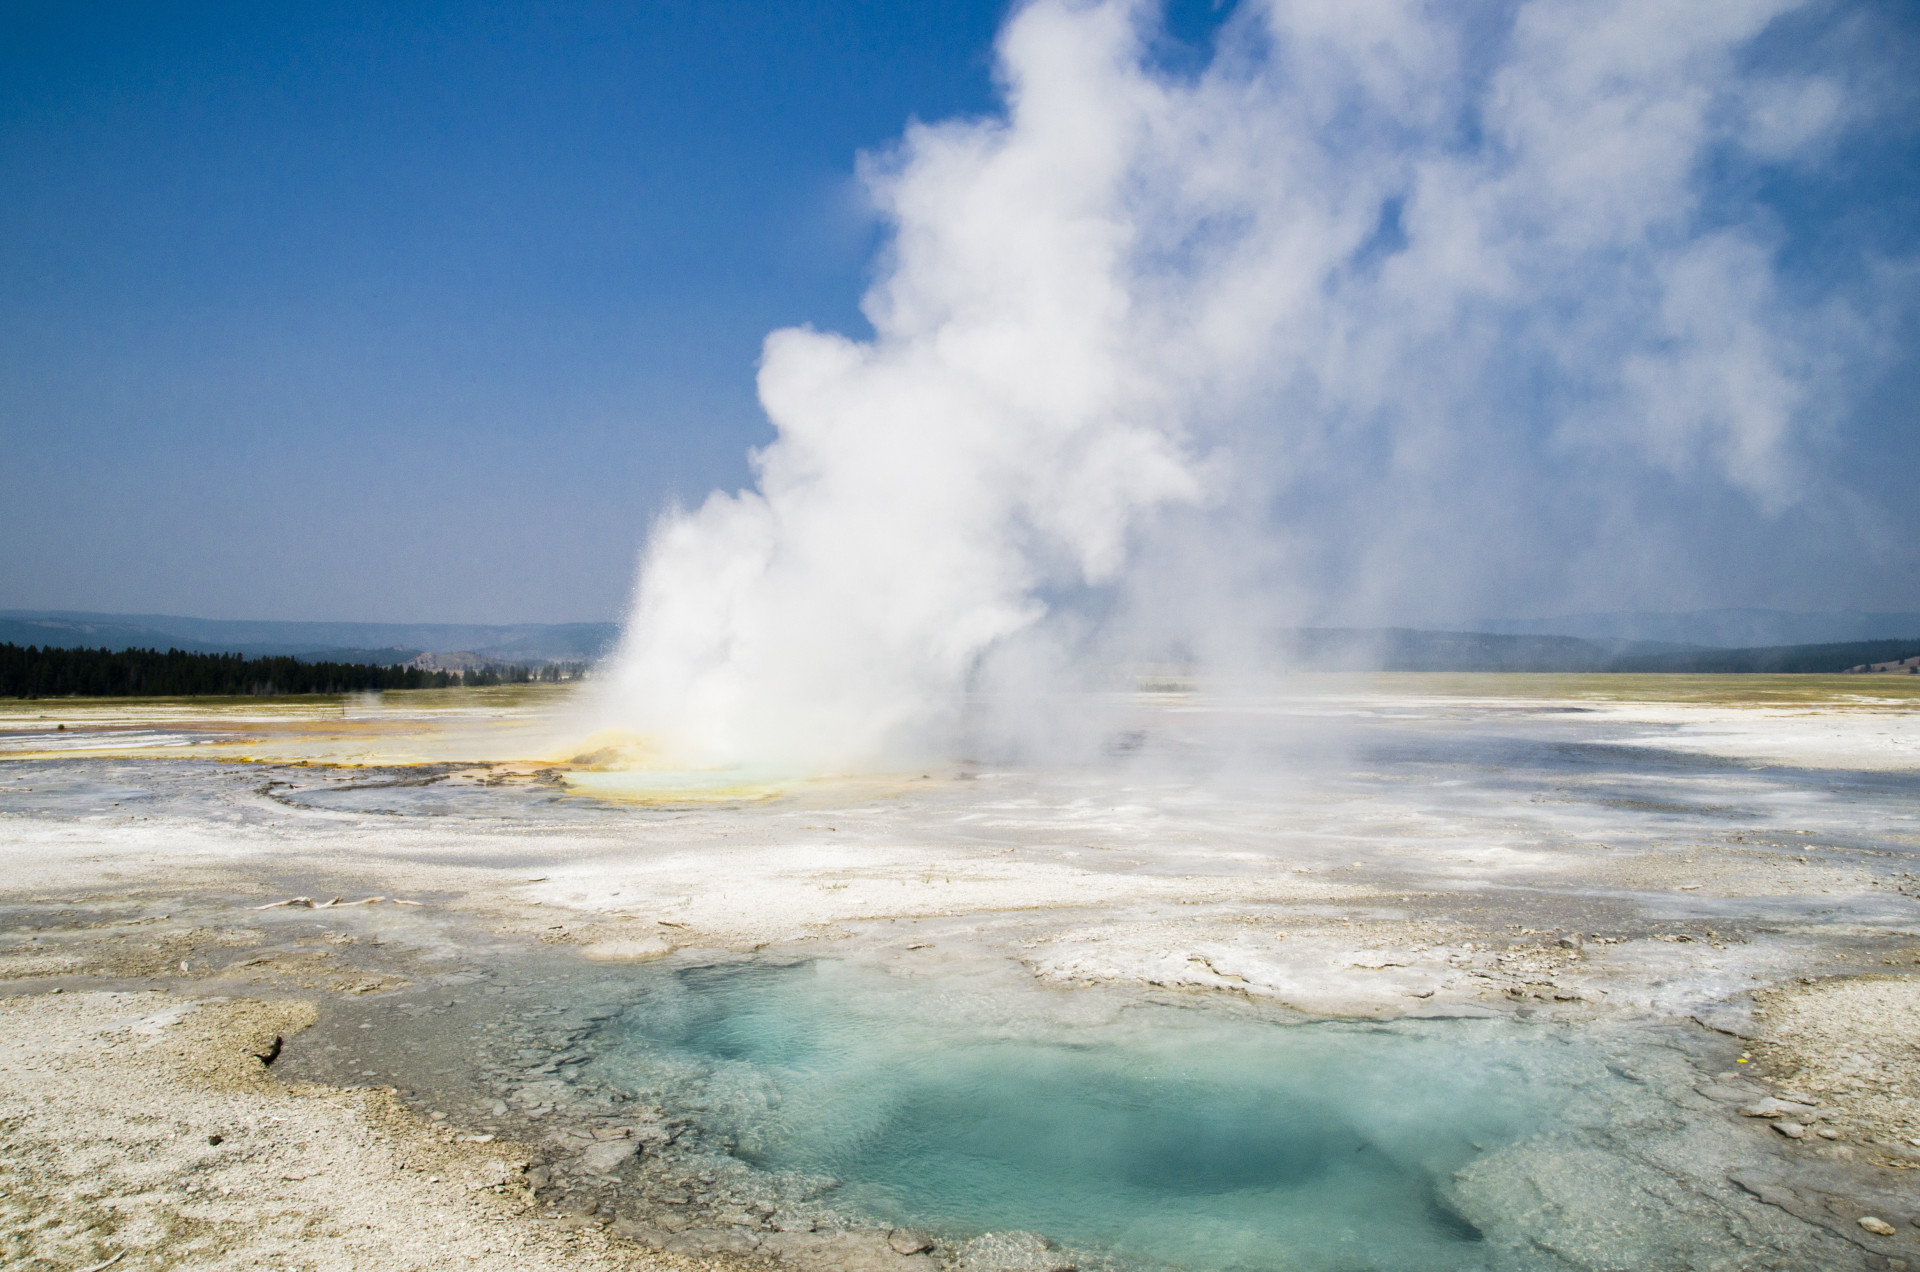 A thermal wonderland of burping mud pots, bubbling fumaroles and explosive geysers. <p>You may also like:<a href="https://www.starsinsider.com/n/262525?utm_source=msn.com&utm_medium=display&utm_campaign=referral_description&utm_content=152242en-en"> The most beautiful sunsets in the UK</a></p>